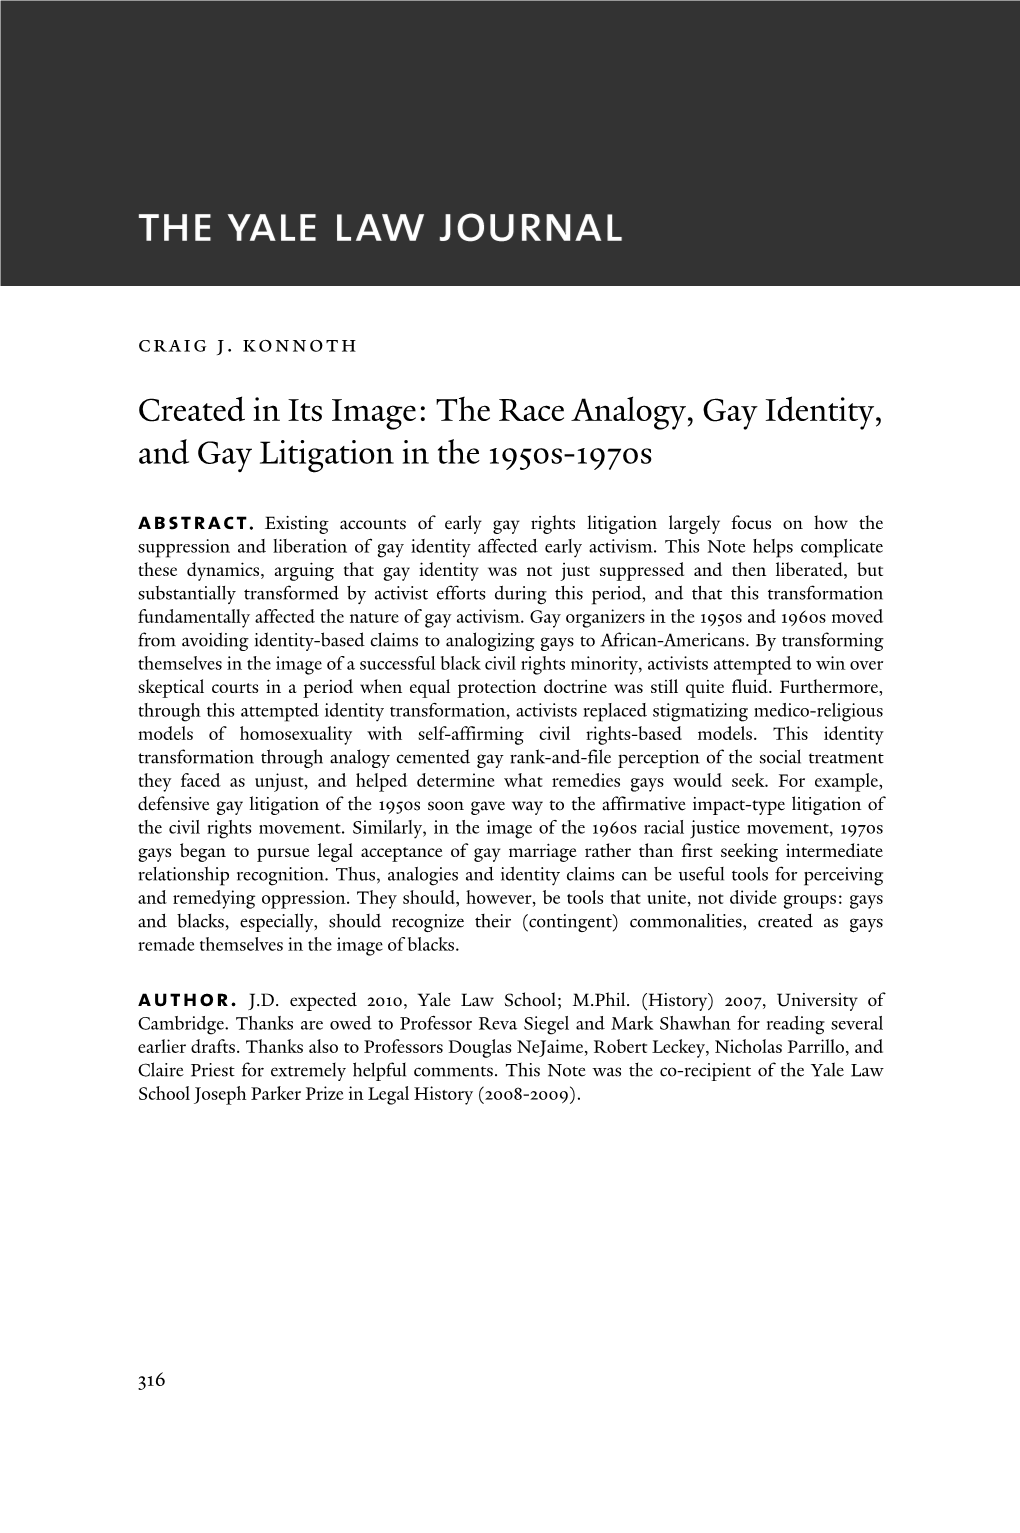 The Race Analogy, Gay Identity, and Gay Litigation in the 1950S-1970S Abstract